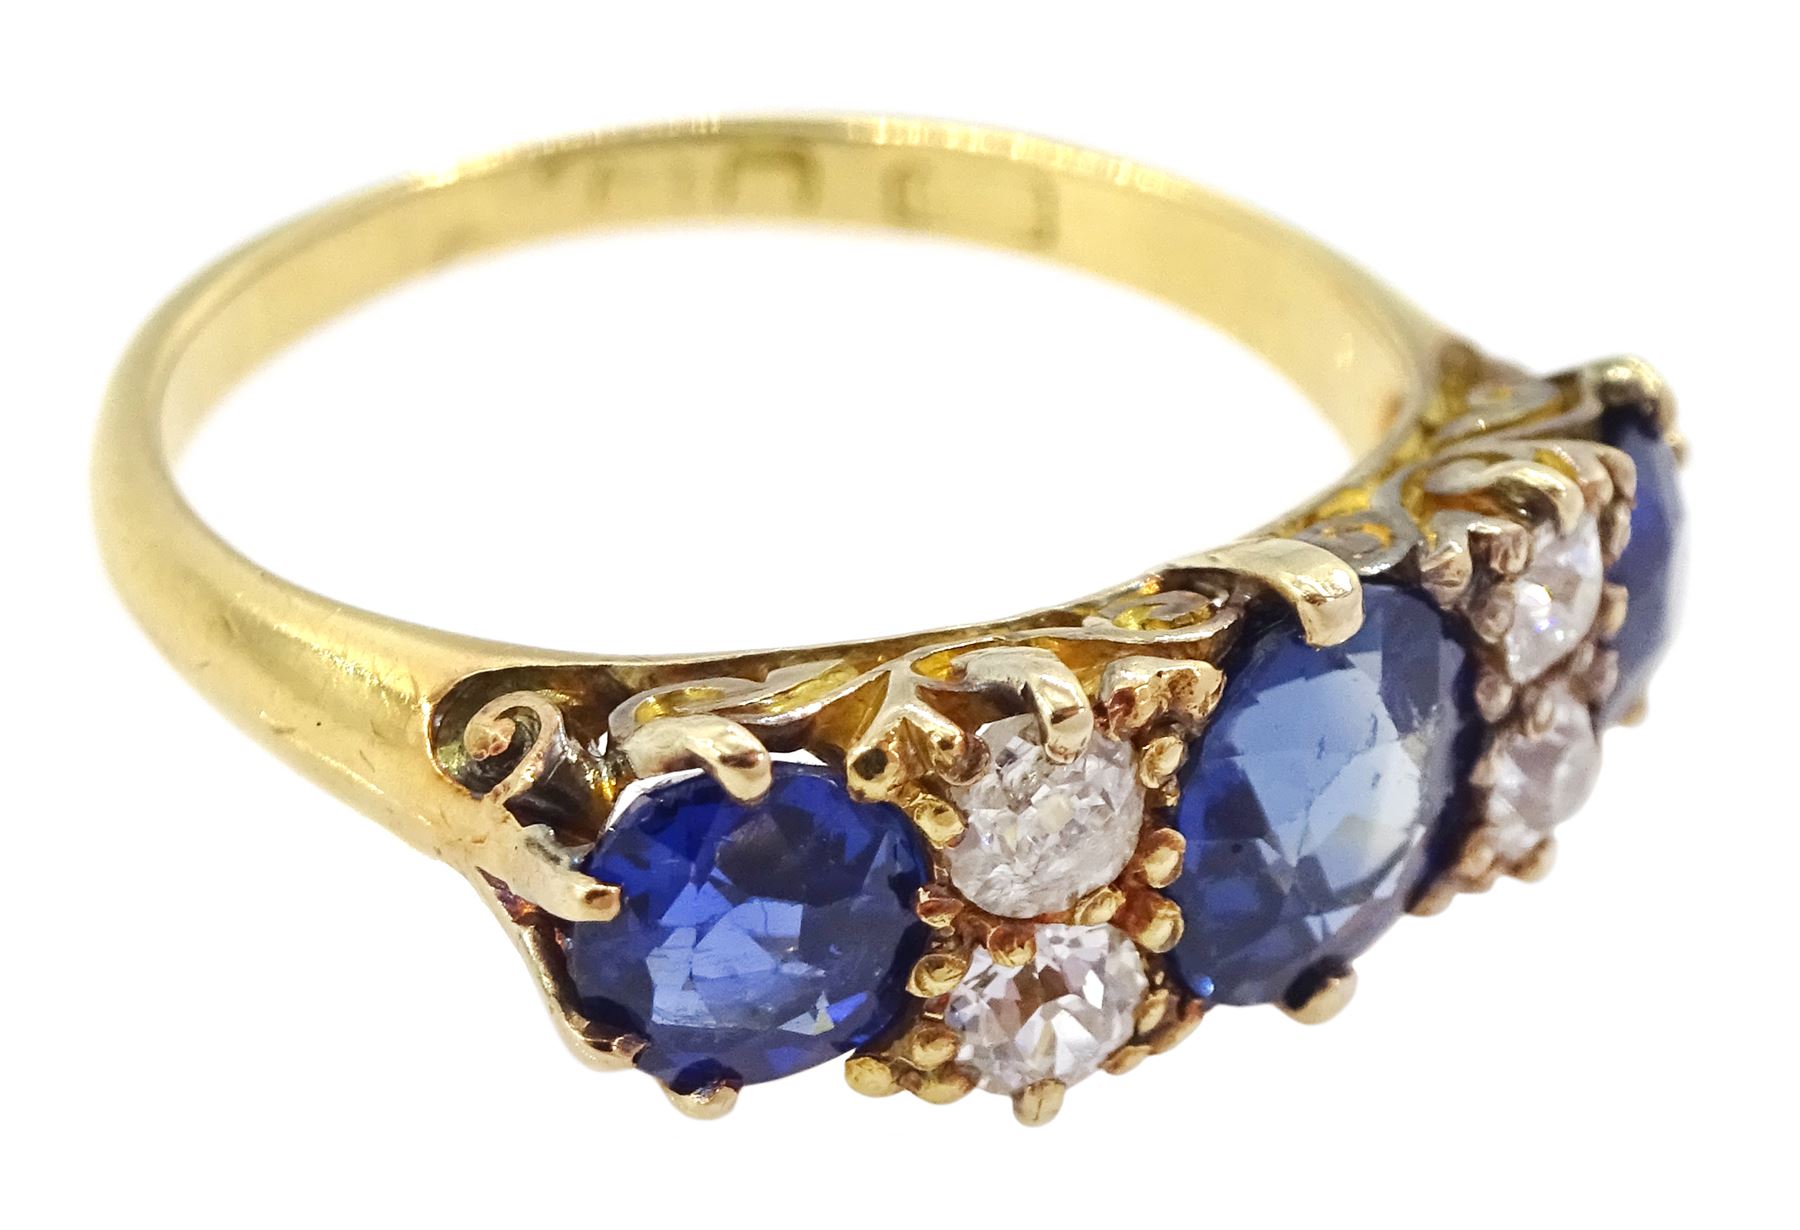 Early 20th century 18ct gold three stone cushion cut sapphire and four stone old cut diamond ring - Image 3 of 4